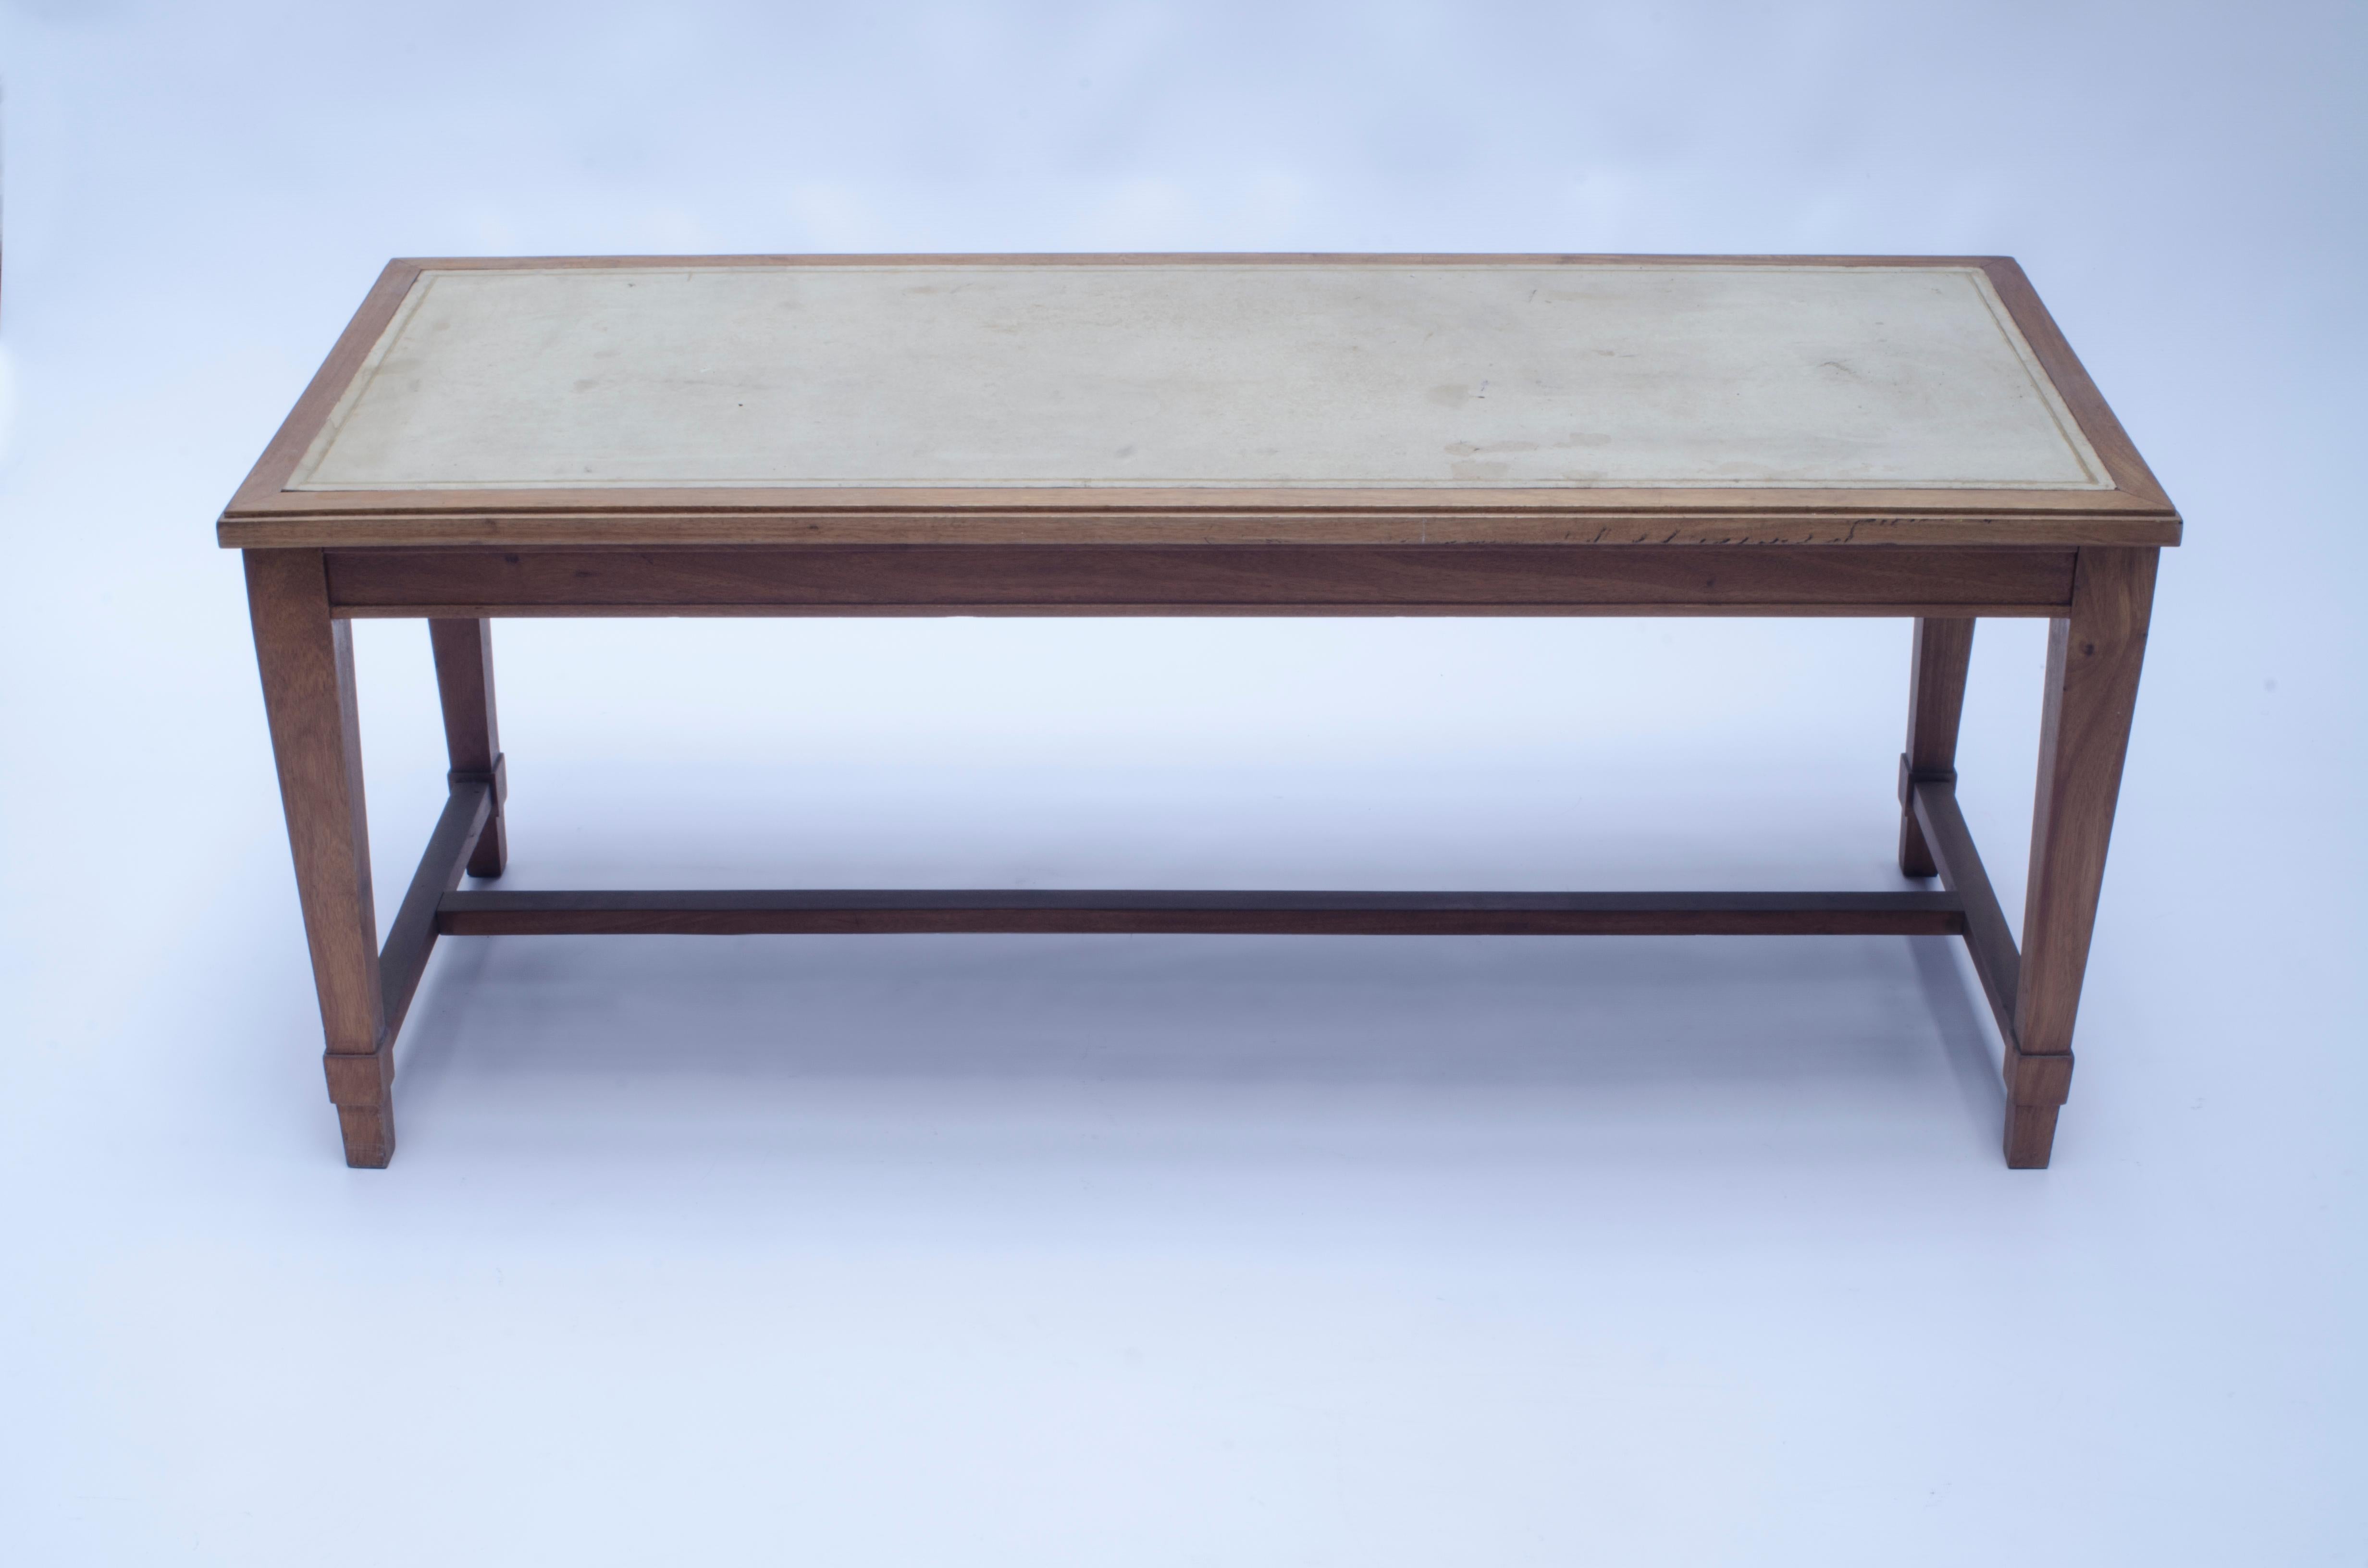 Table made of oak with leather top and golden vignette. Design by Jean-Michel Frank (1895-1941), made by CASA COMTE (1932-1960), numbered 6760.

Argentina, CIRCA 1940.